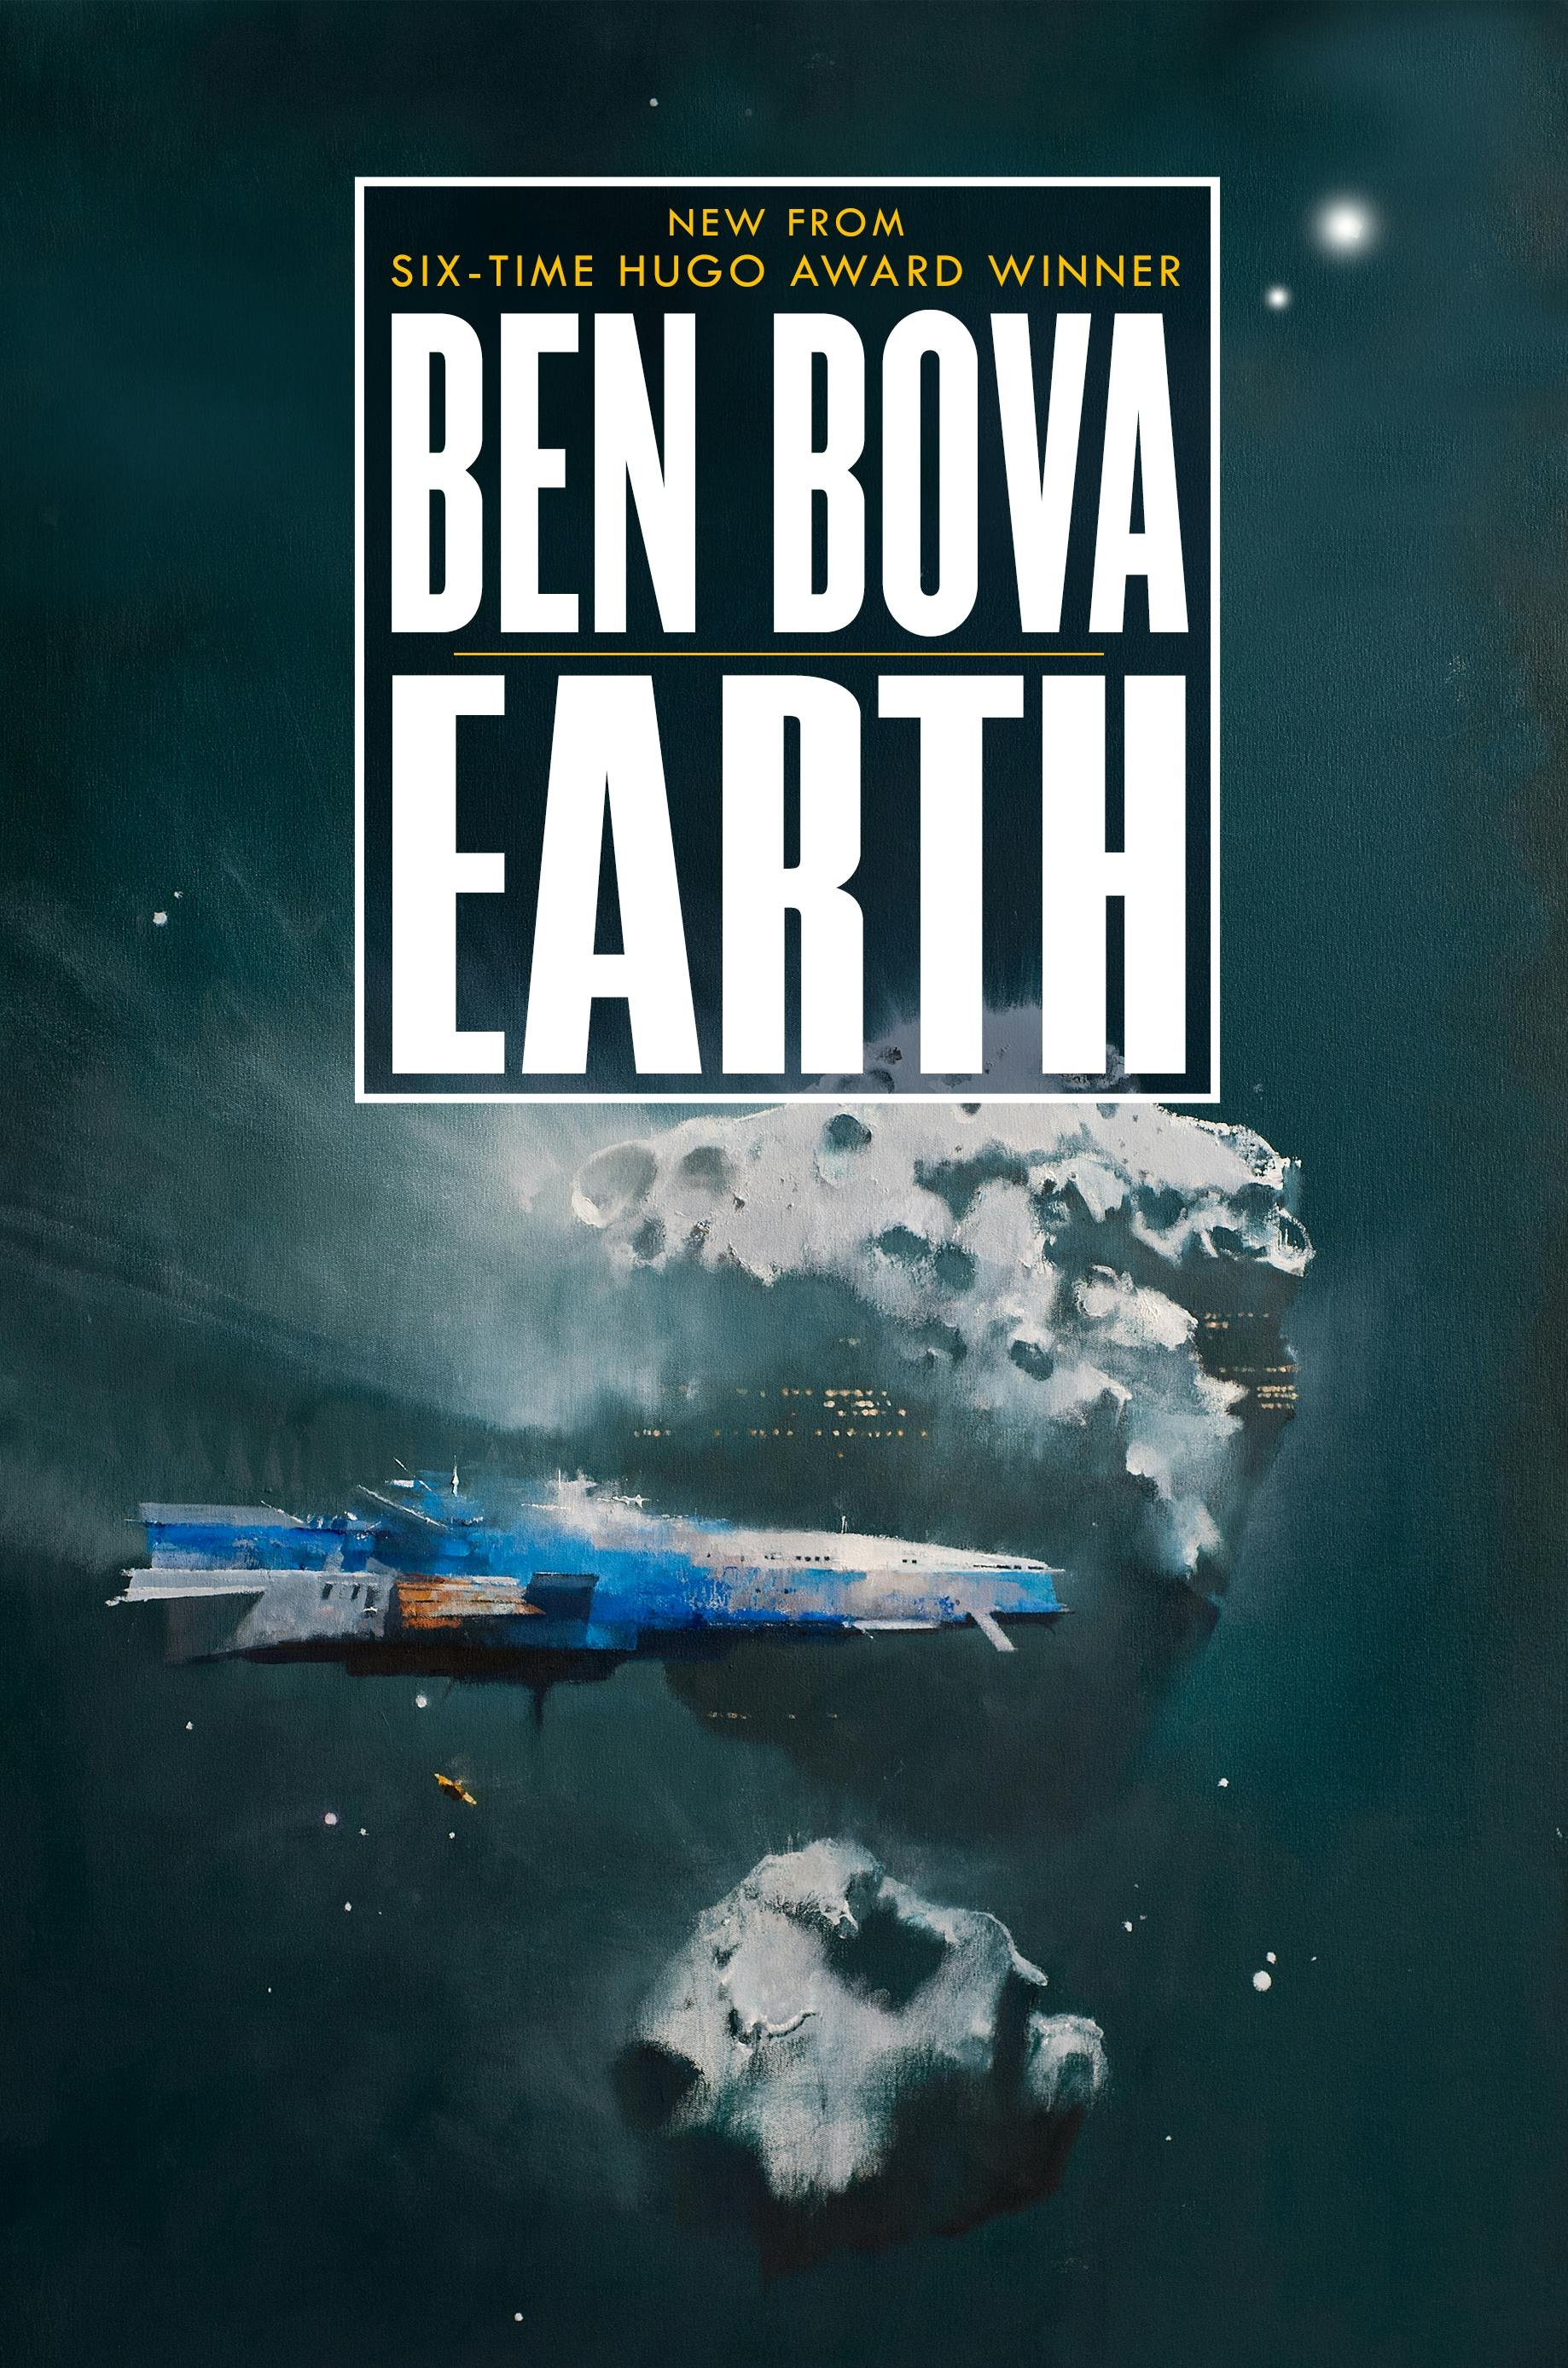 Cover for the book titled as: Earth